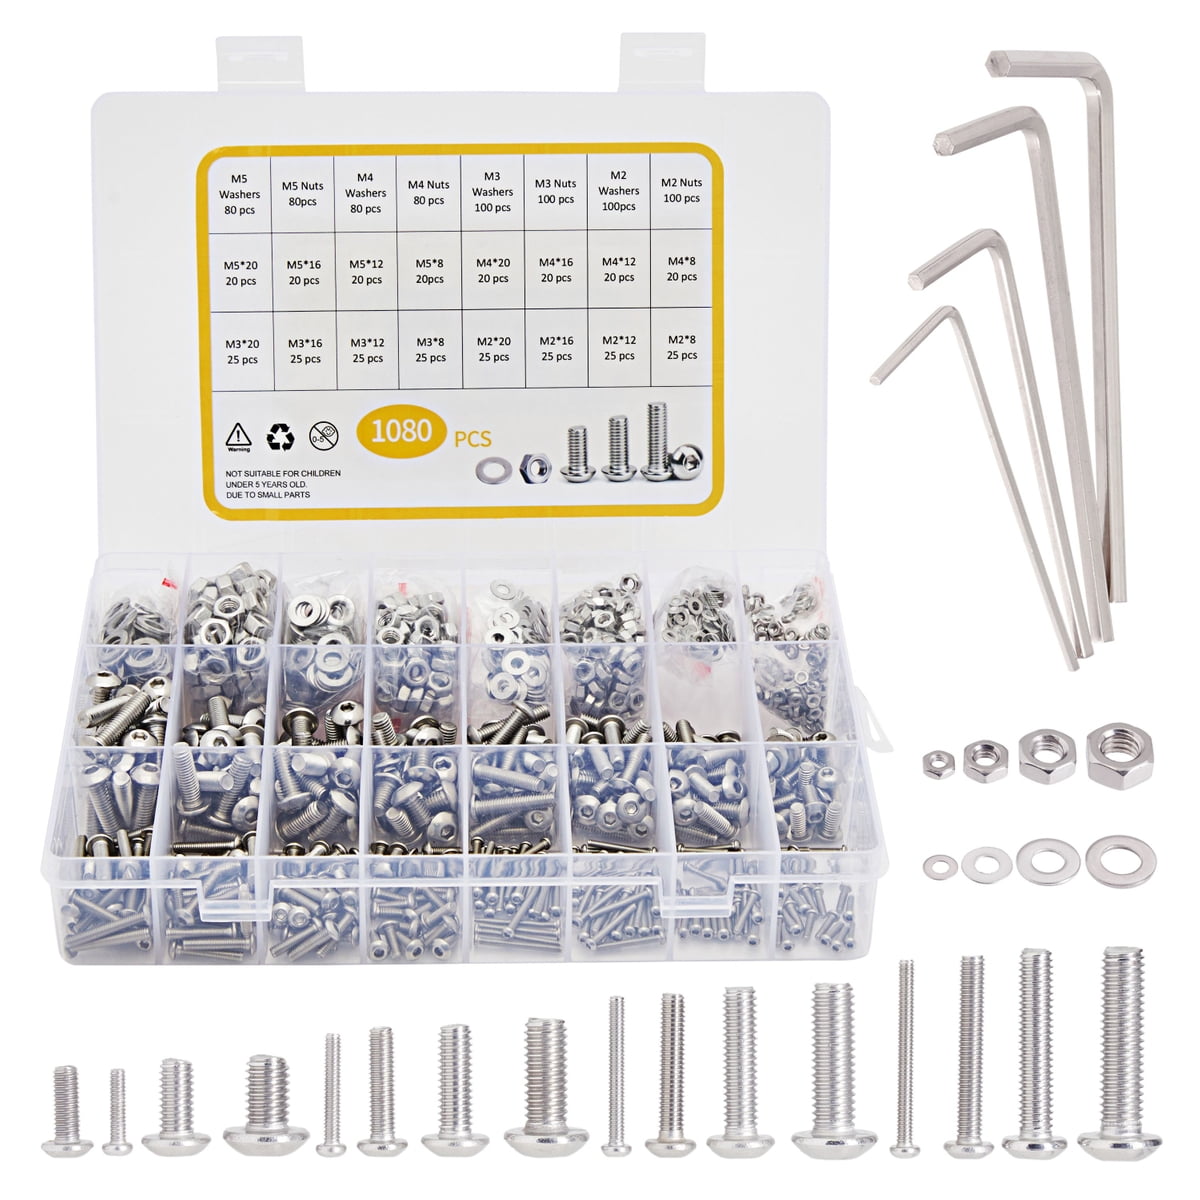 SET SCREW ASSORTMENT KIT WITH COMPARTMENTED STORAGE CASE STAINLESS STEEL NEW 